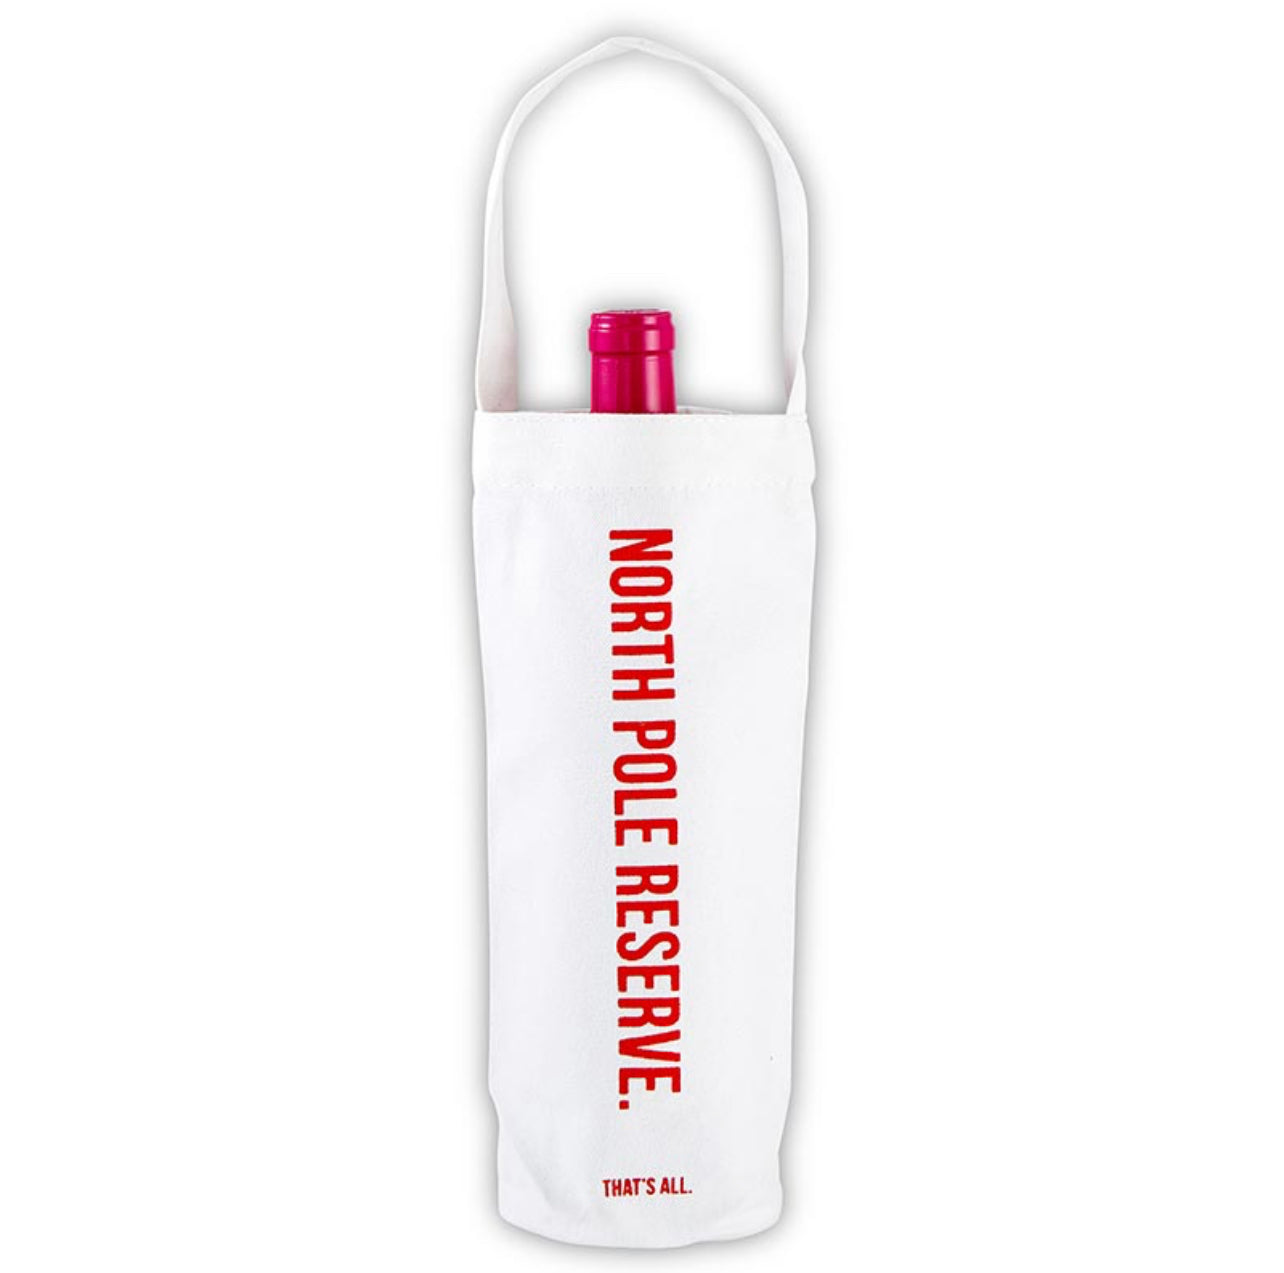 white canvas wine bag for christmas with red script that reads "north pole reserve"